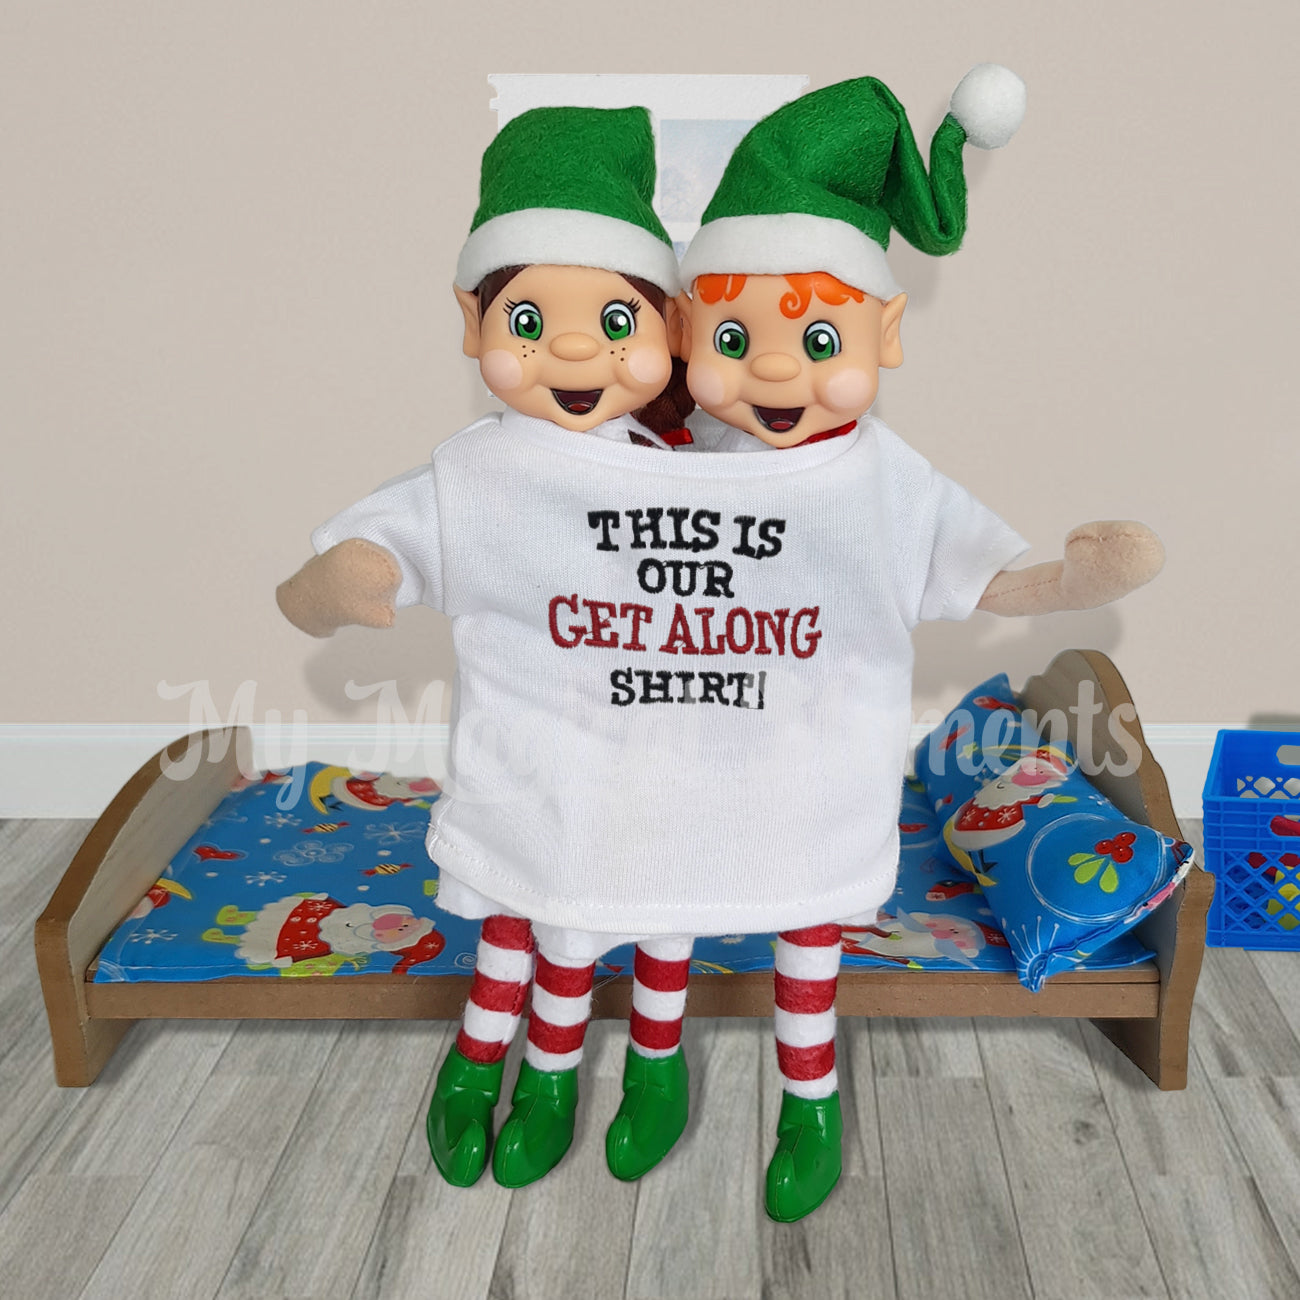 My elf friends forced to get along in a shared shirt. in front a miniature bed